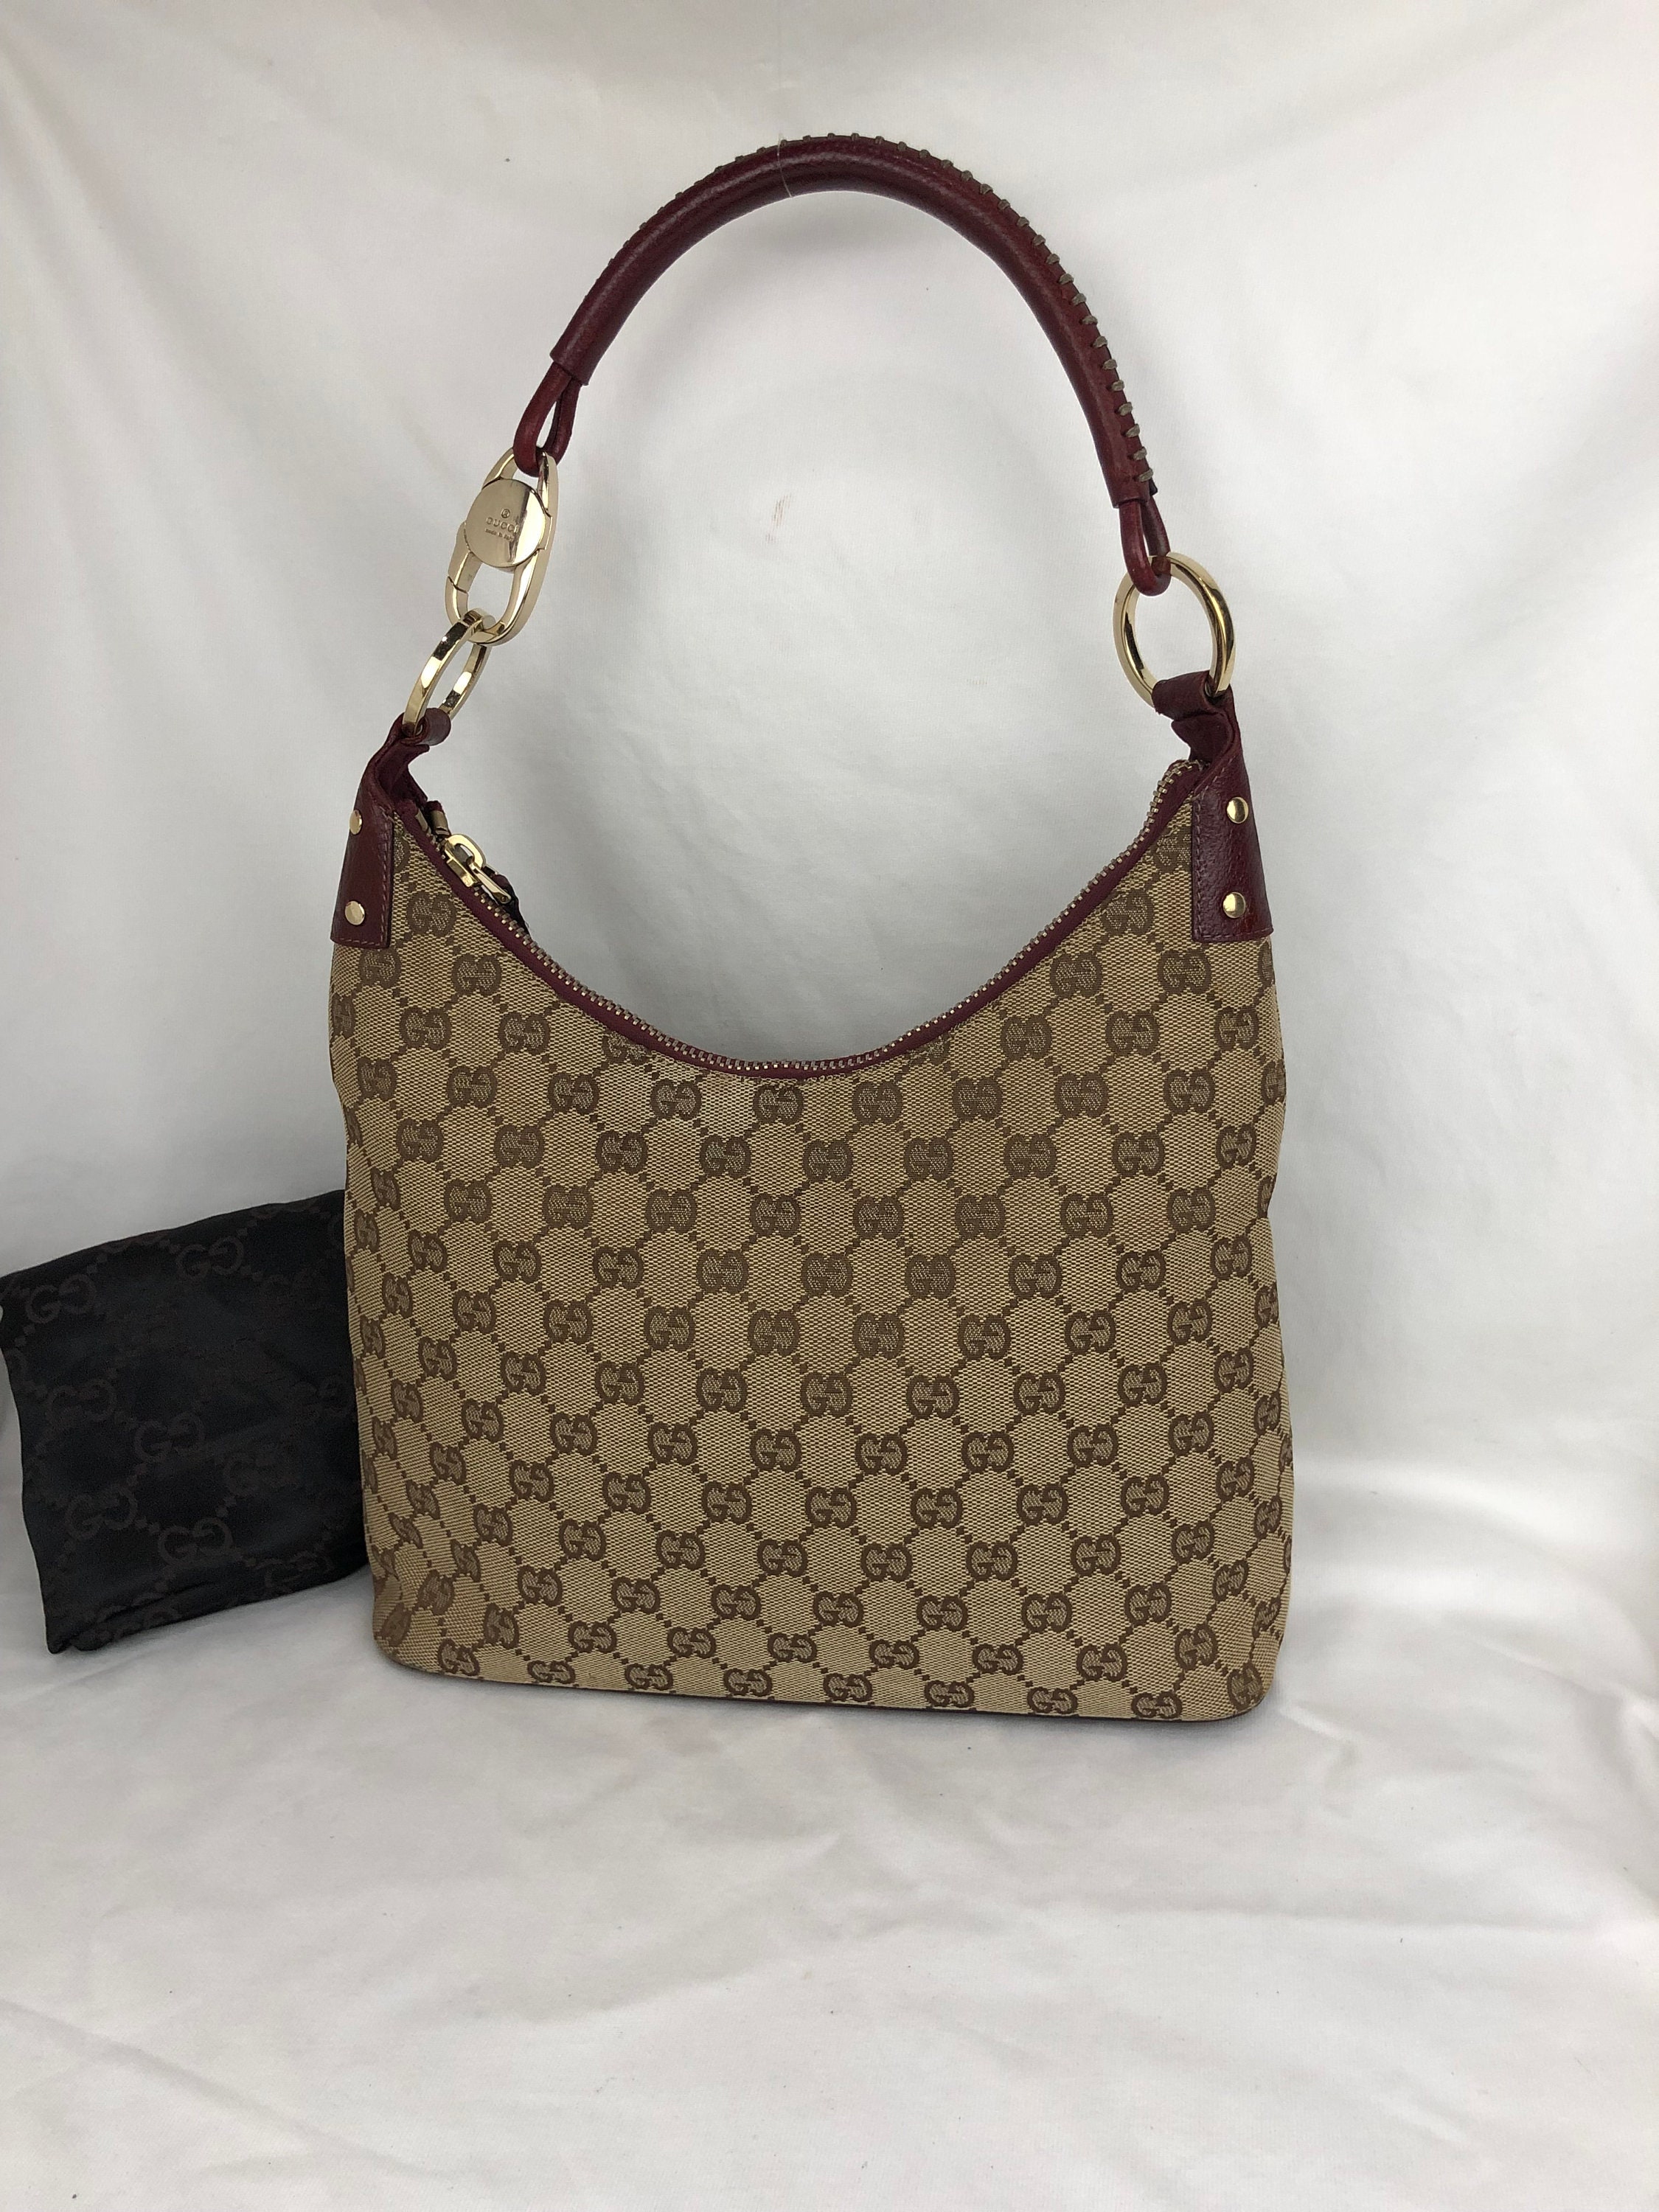 GUCCI QUEEN HOBO Shoulder Bag Brown Monogram Canvas w/Brown Leather Trim -  BOW!